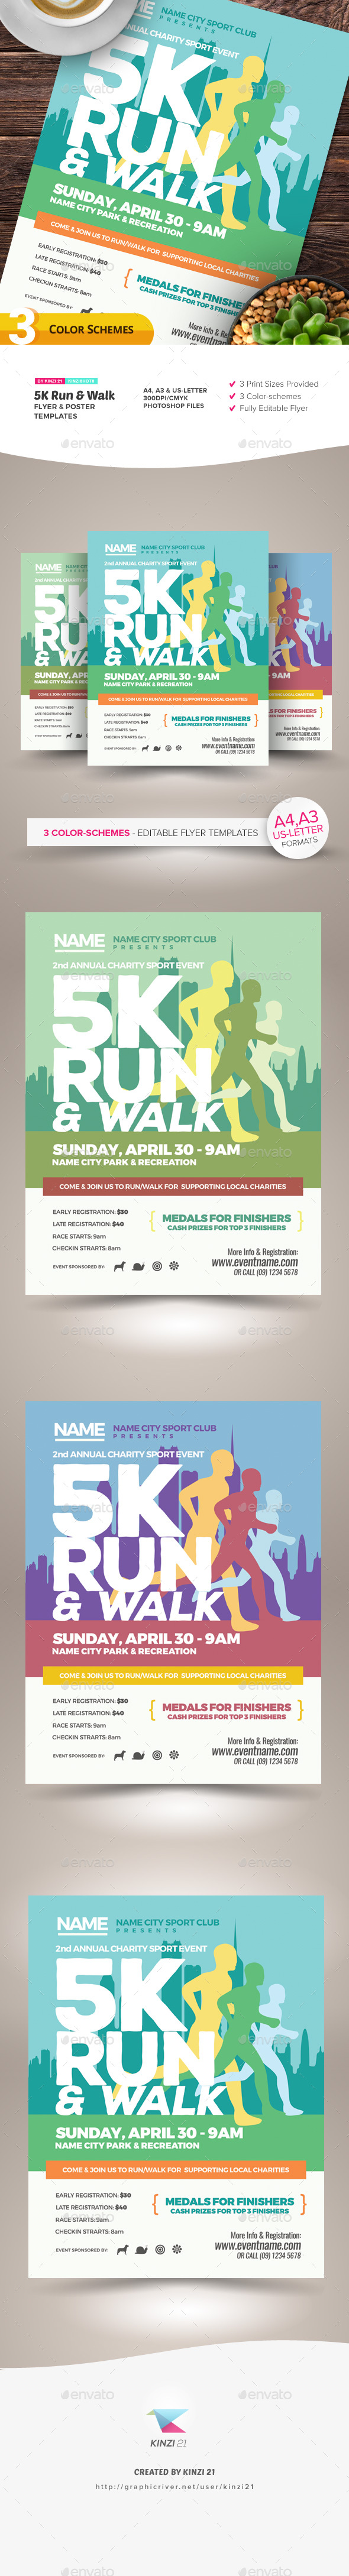 23K Run & Walk Flyer and Poster Templates With 5K Flyer Template